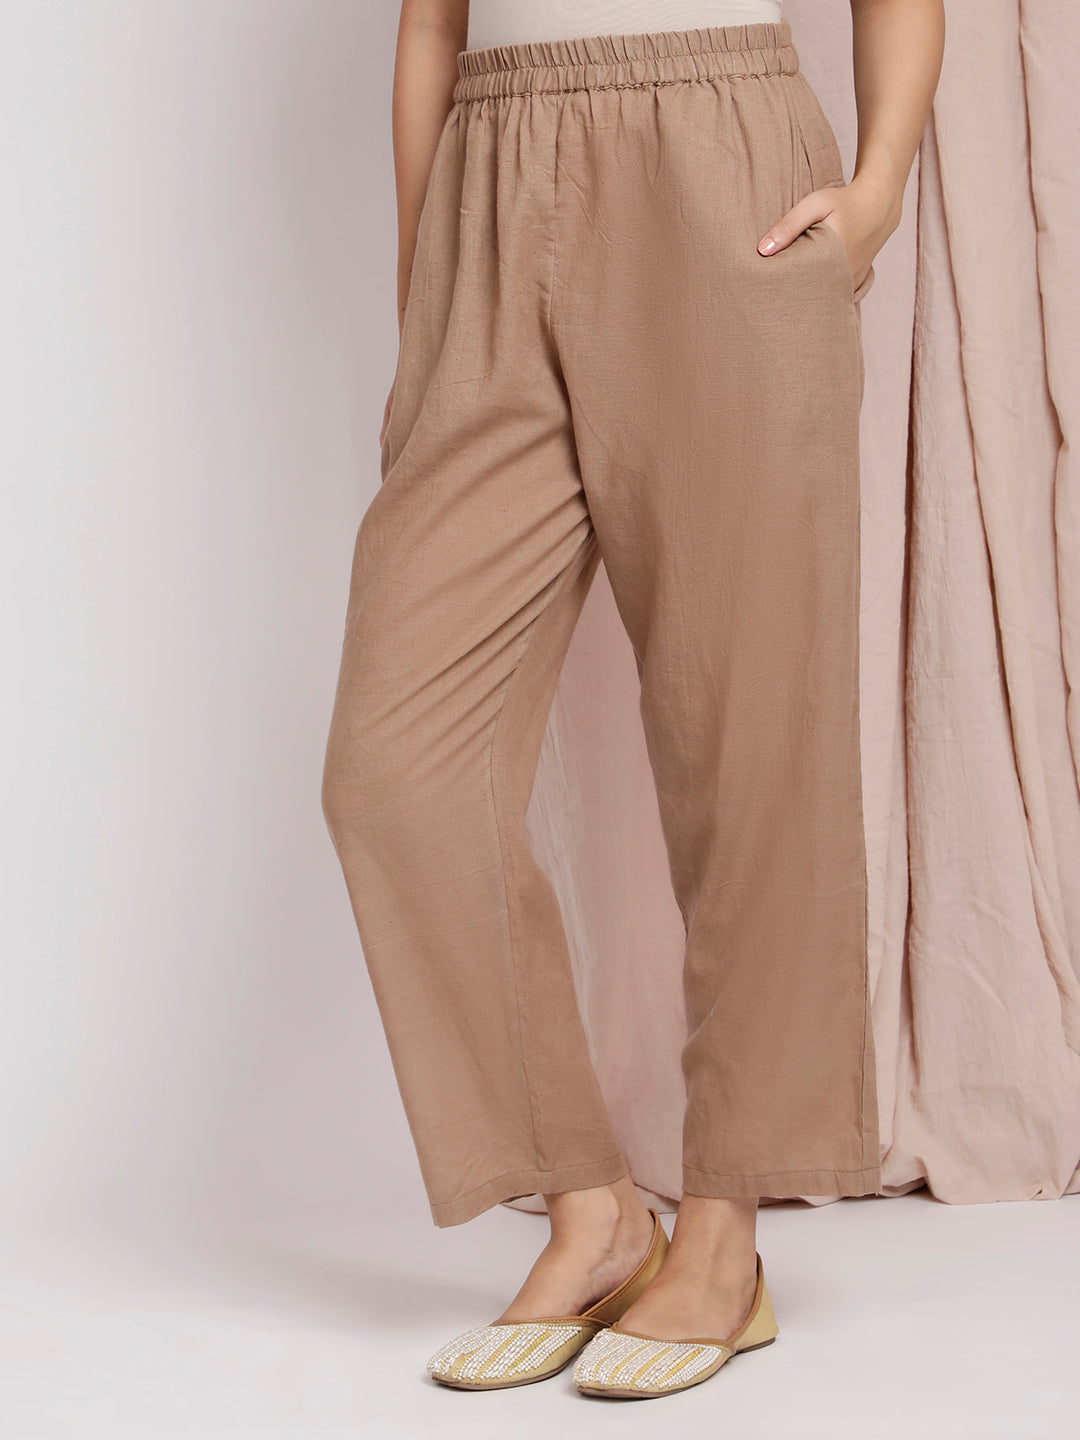 BROWN CUTWORK EMBROIDERED COTTON PANTS